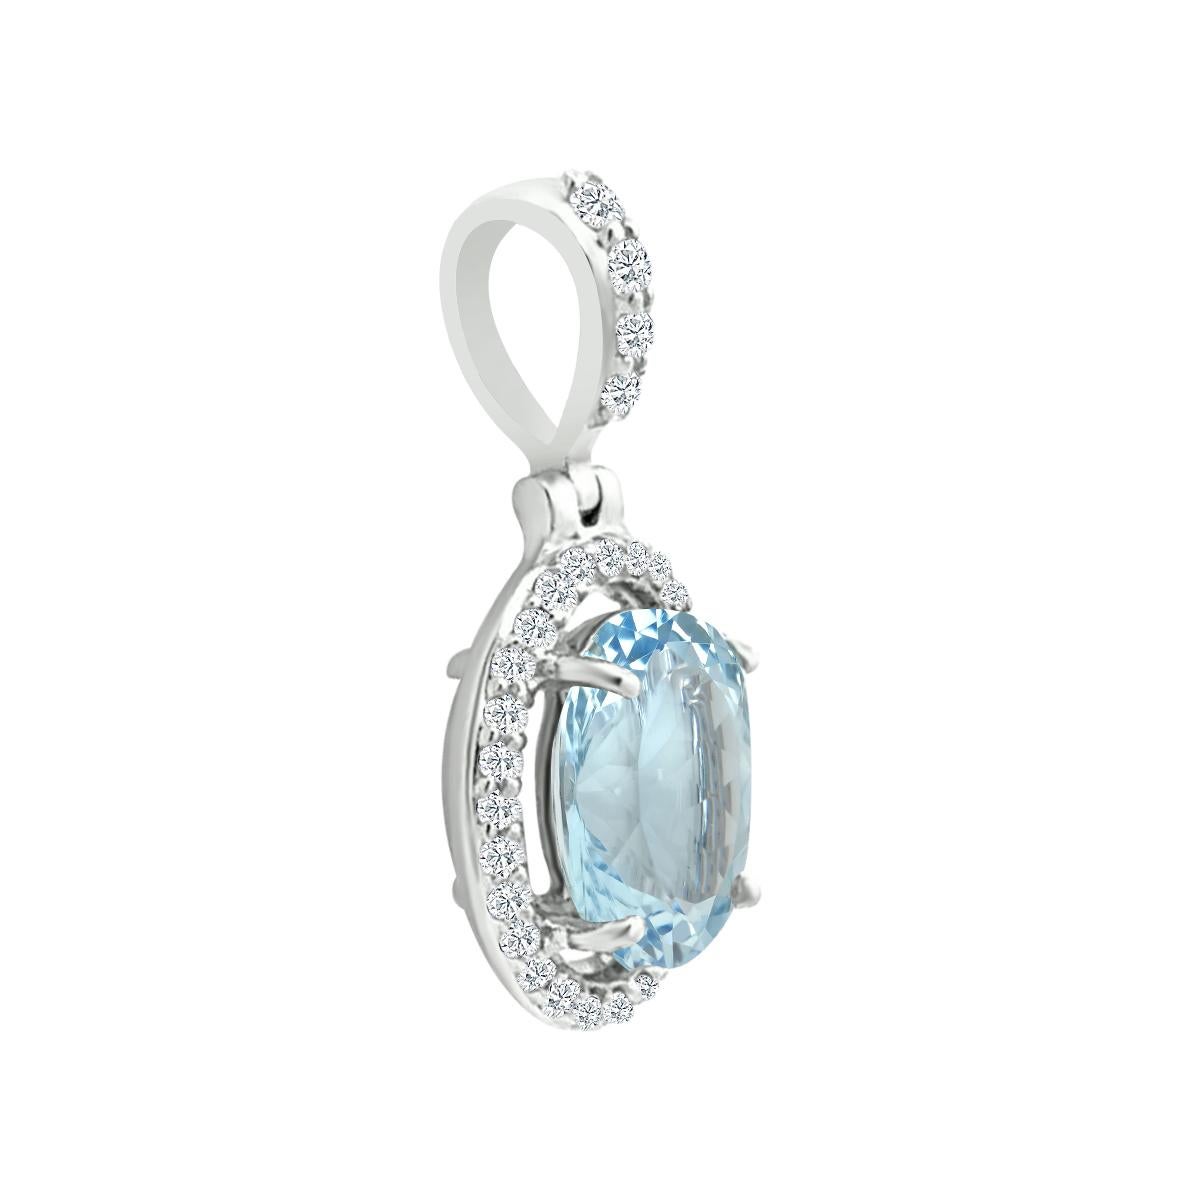 Modern 14K White Gold 1.27cts Aquamarine and Diamond Pendant, Style#TS1311AQP 22073/11 For Sale